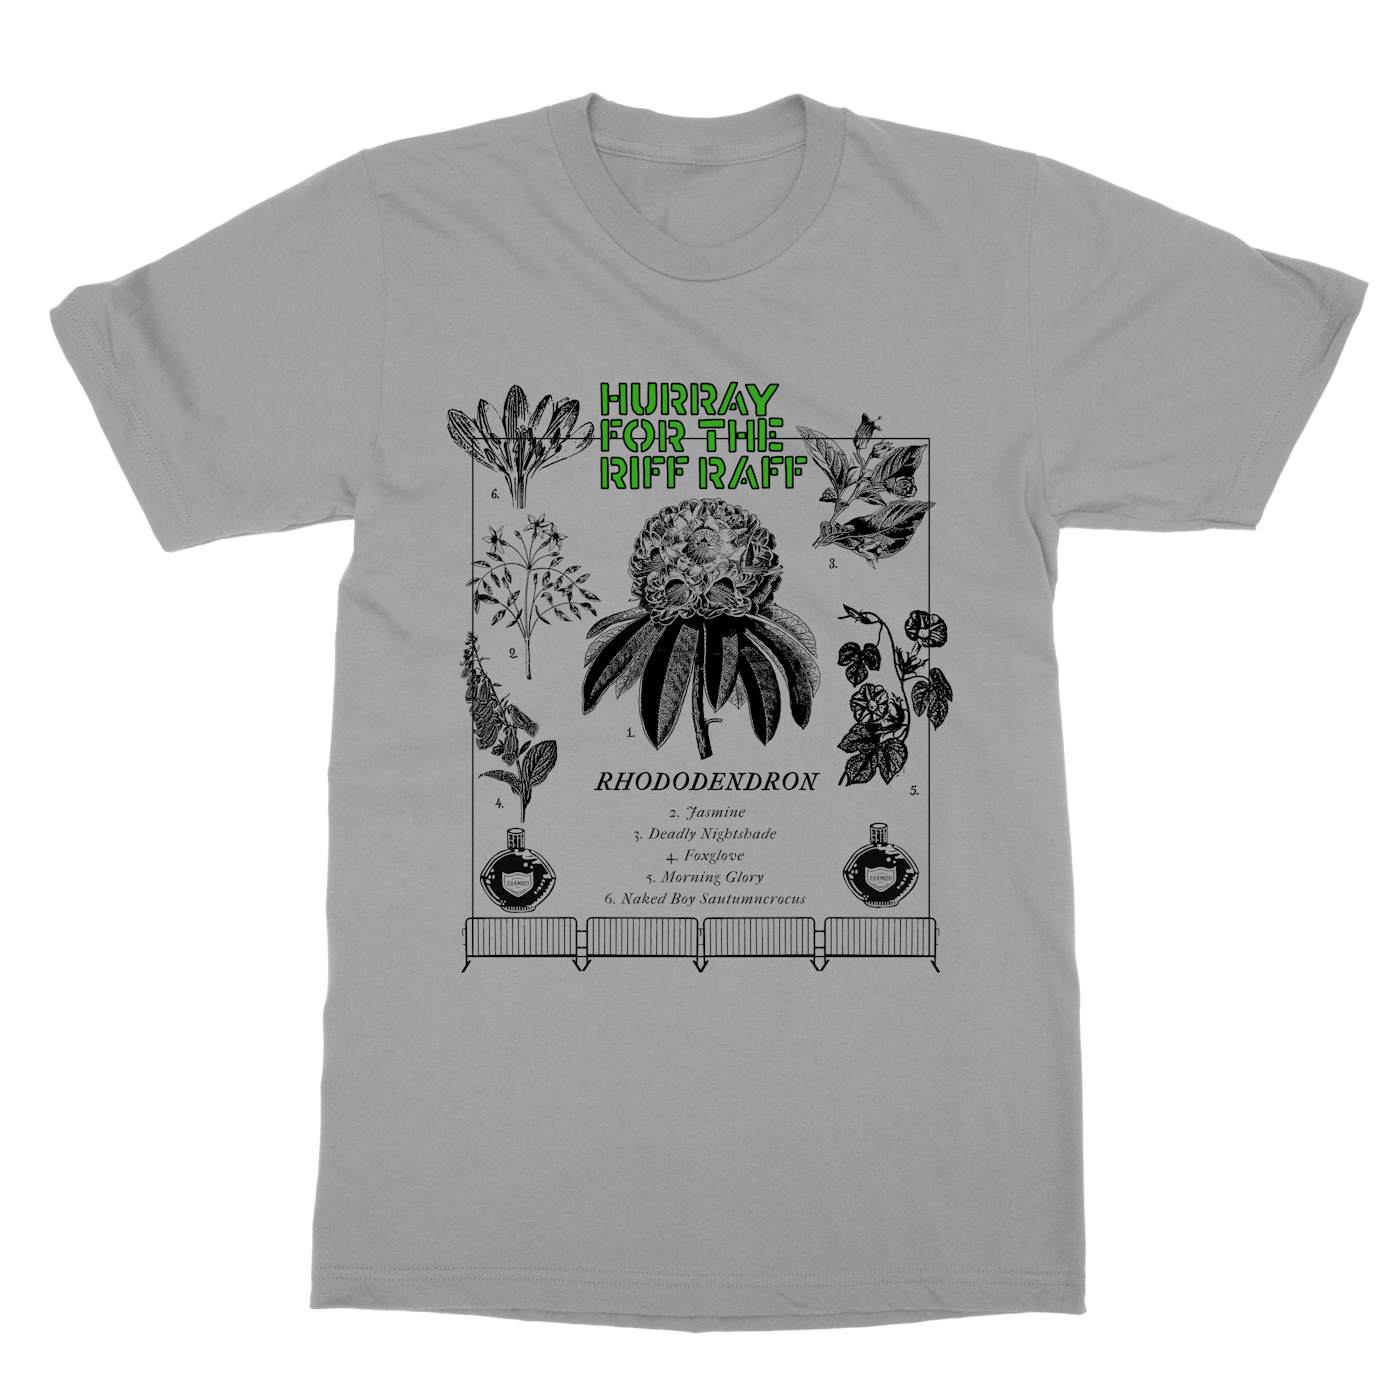 Hurray For The Riff Raff | Rhododendron T-Shirt